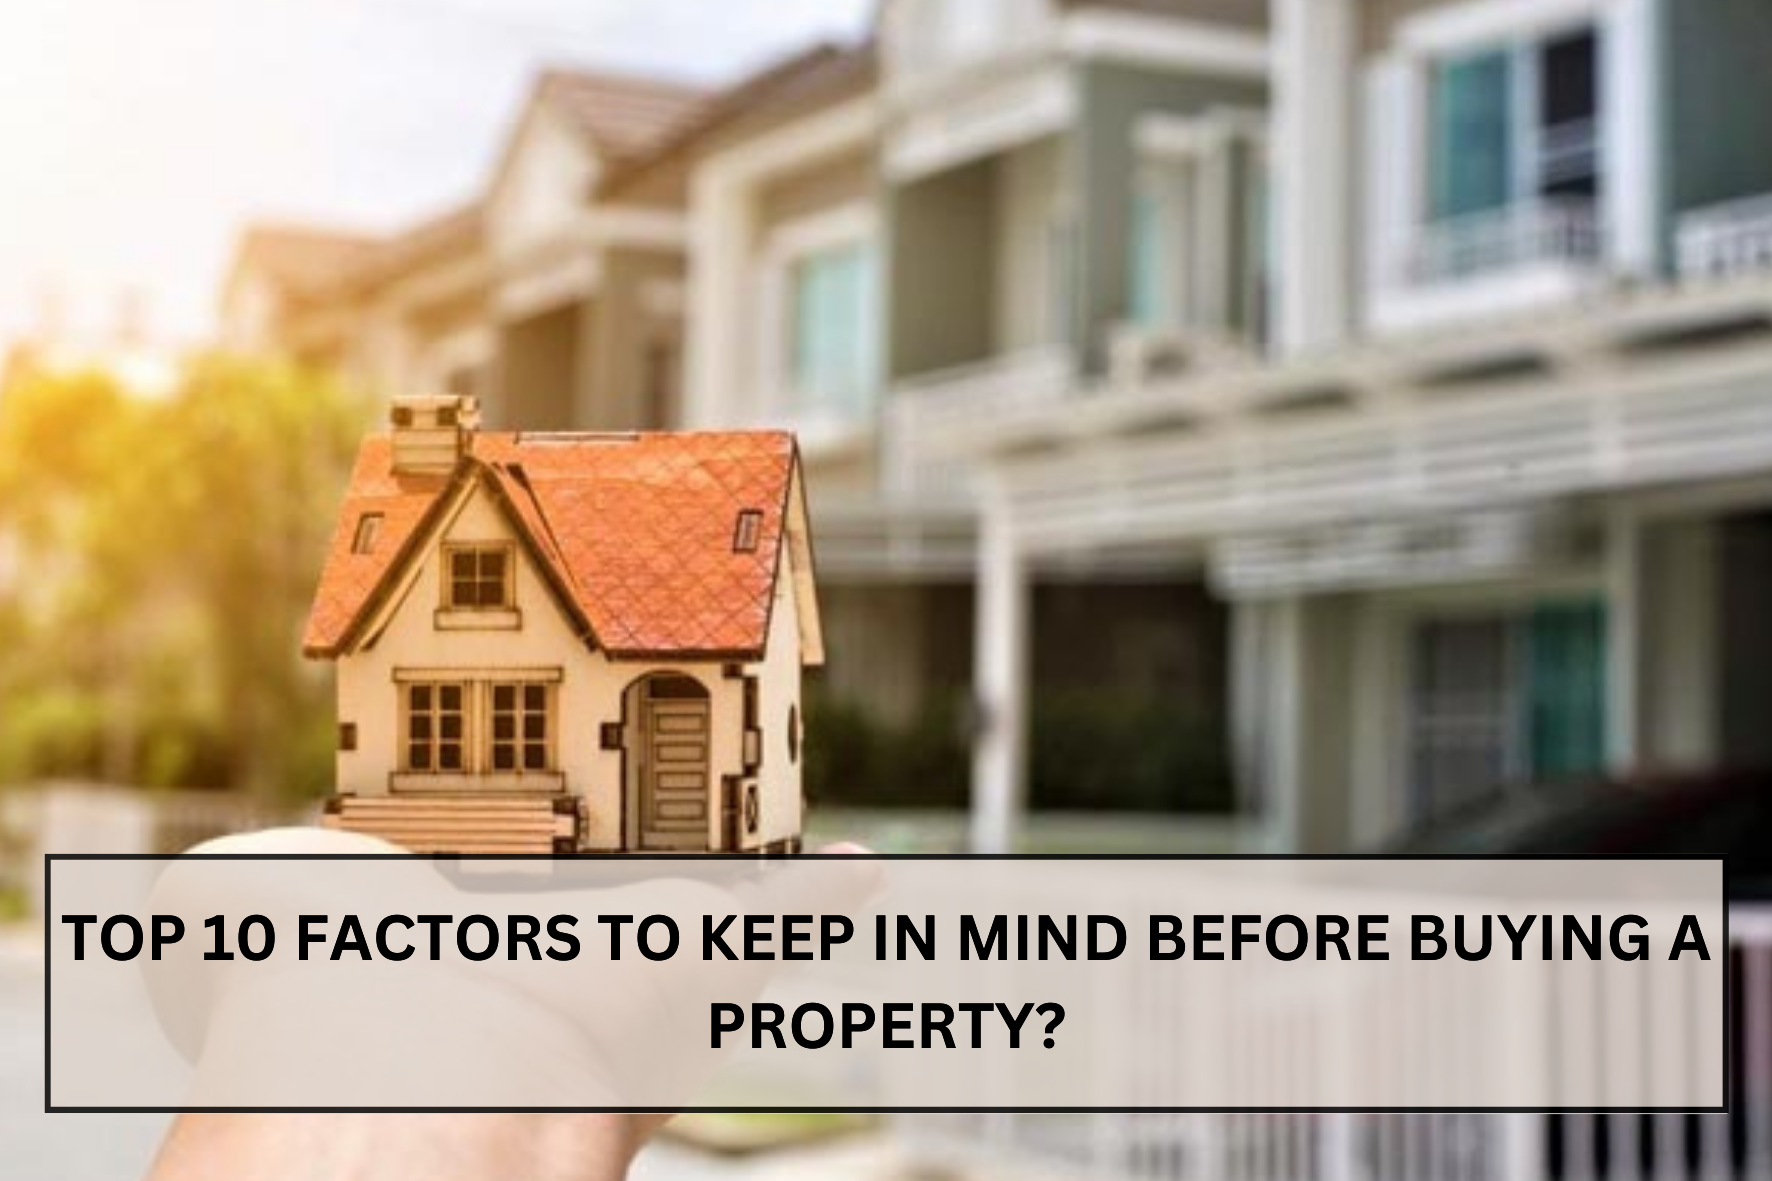 uploads/blog/Top_10_Factors_to_Keep_in_Mind_Before_Buying_a_Property.png